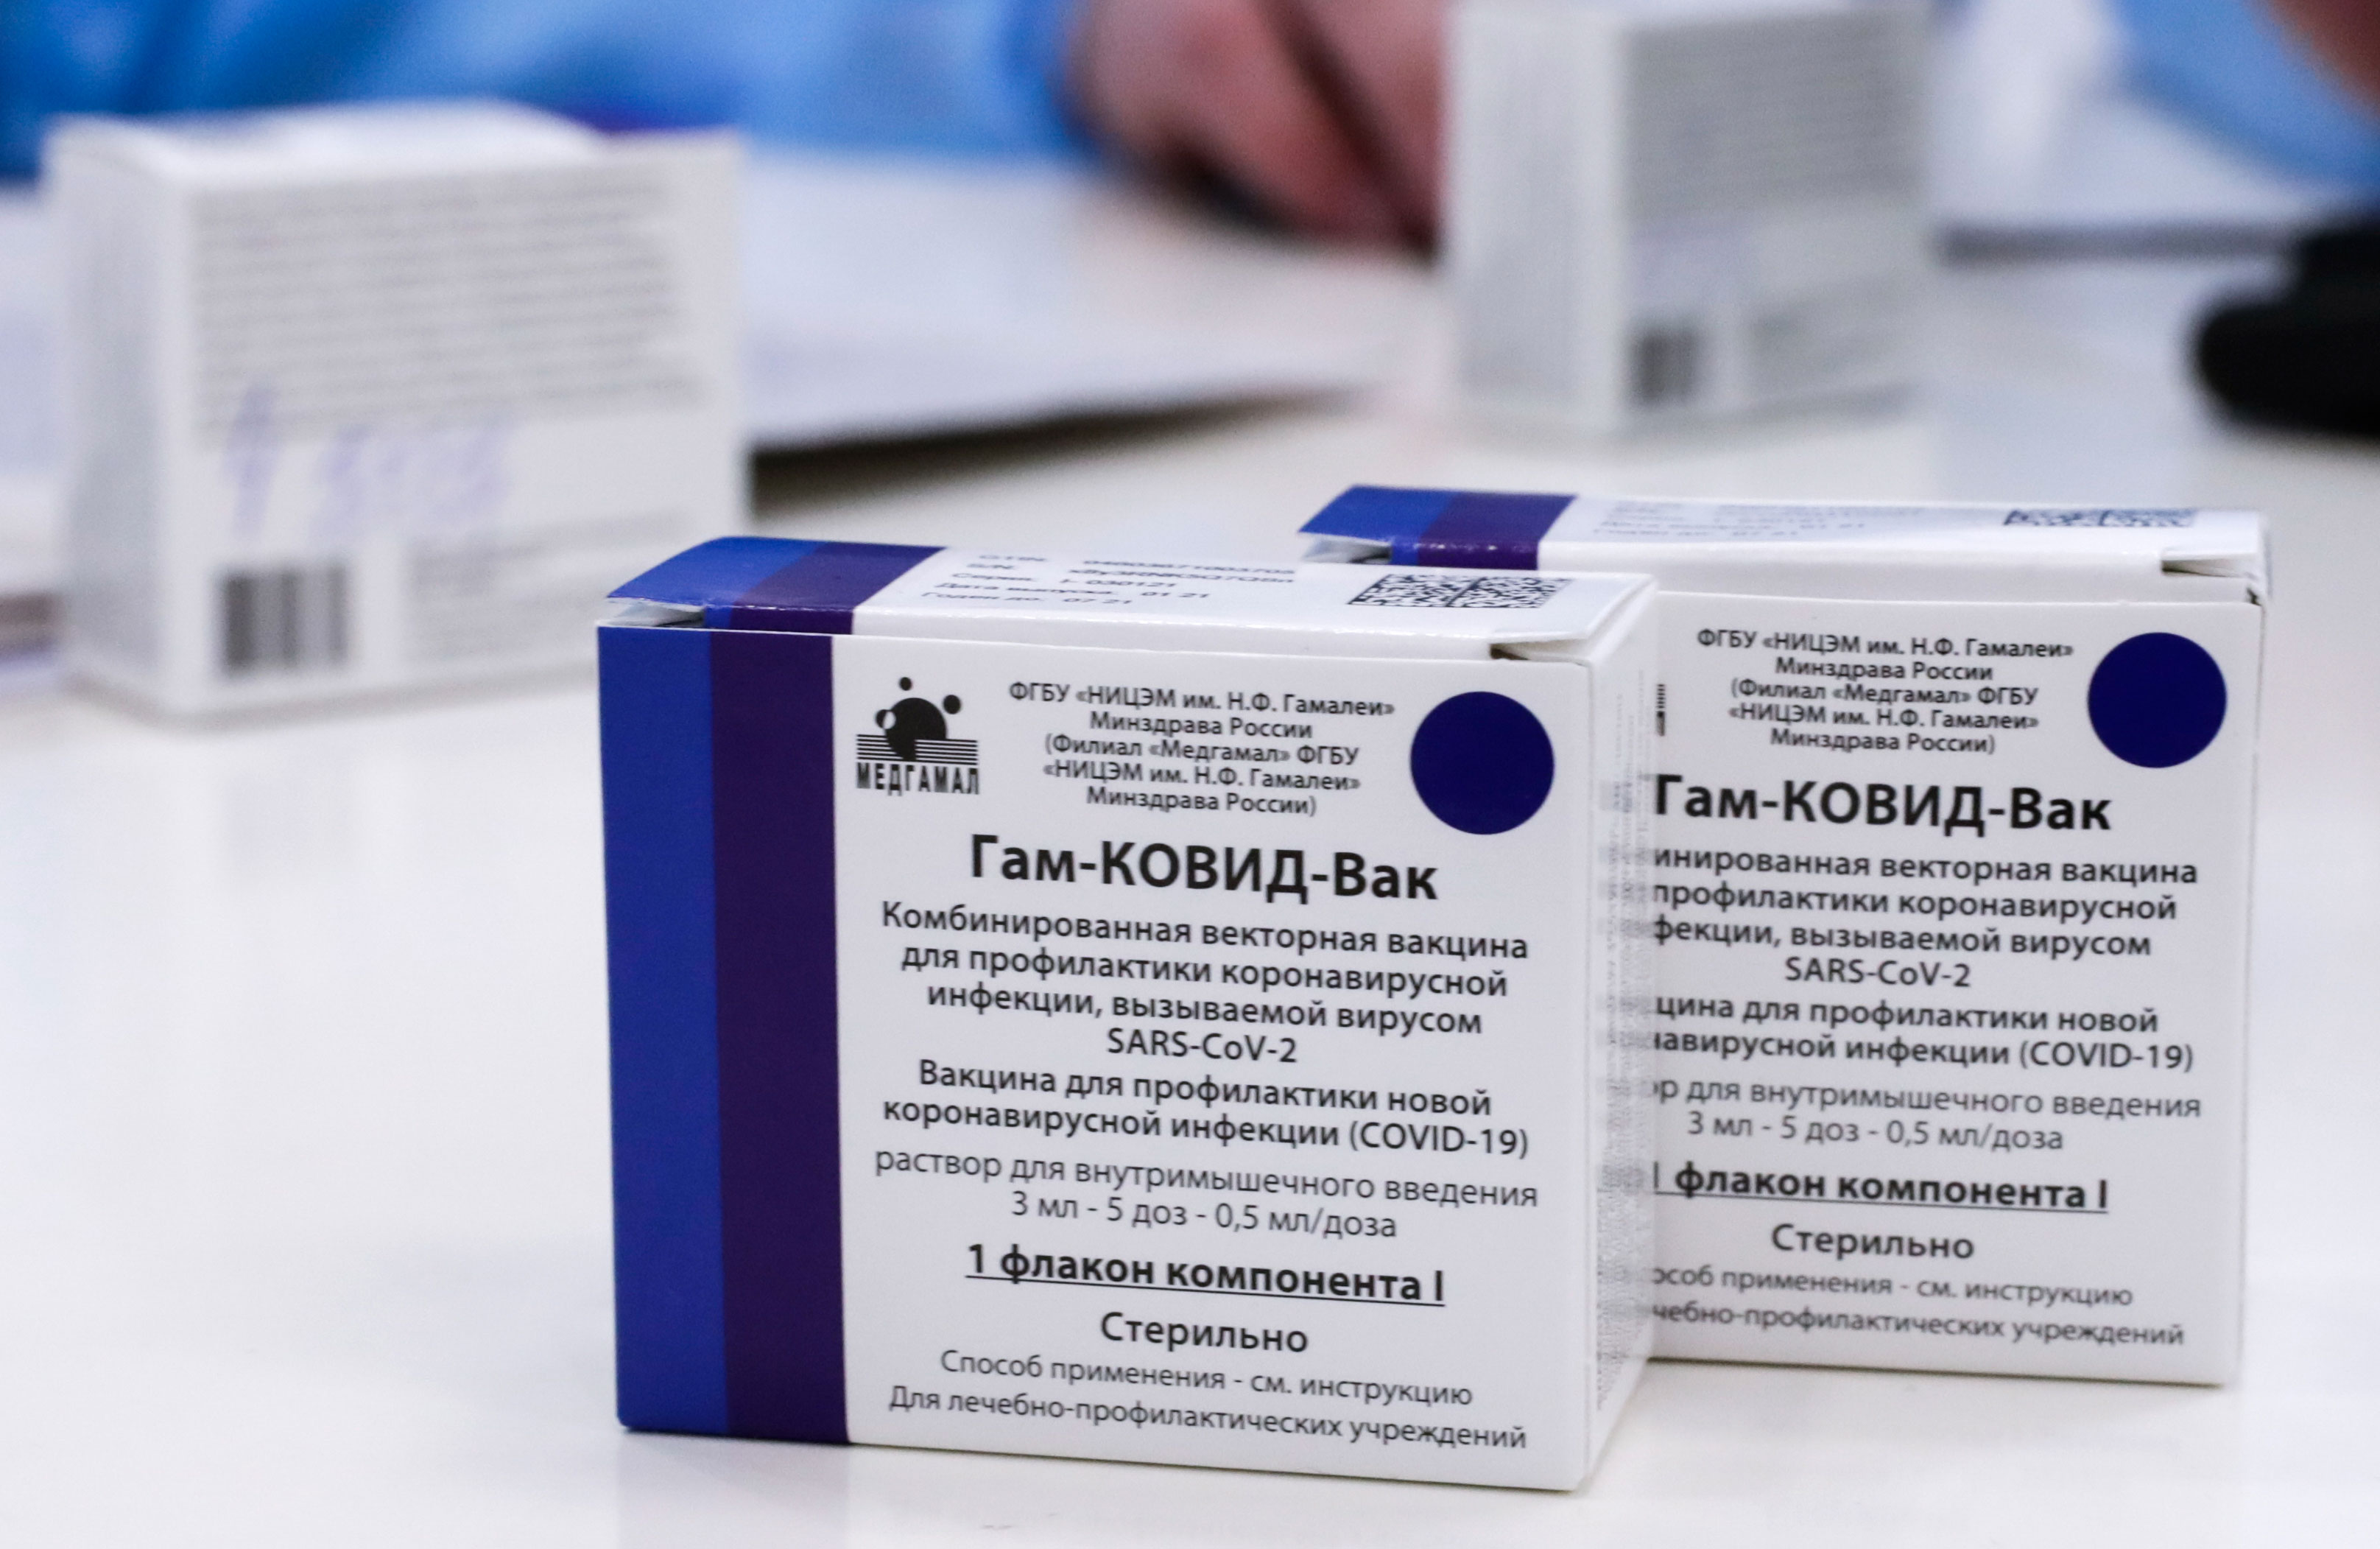 Packages contain a component of the Gam-COVID-Vac Covid-19 vaccine, also known as Sputnik V, in Moscow on March 17.